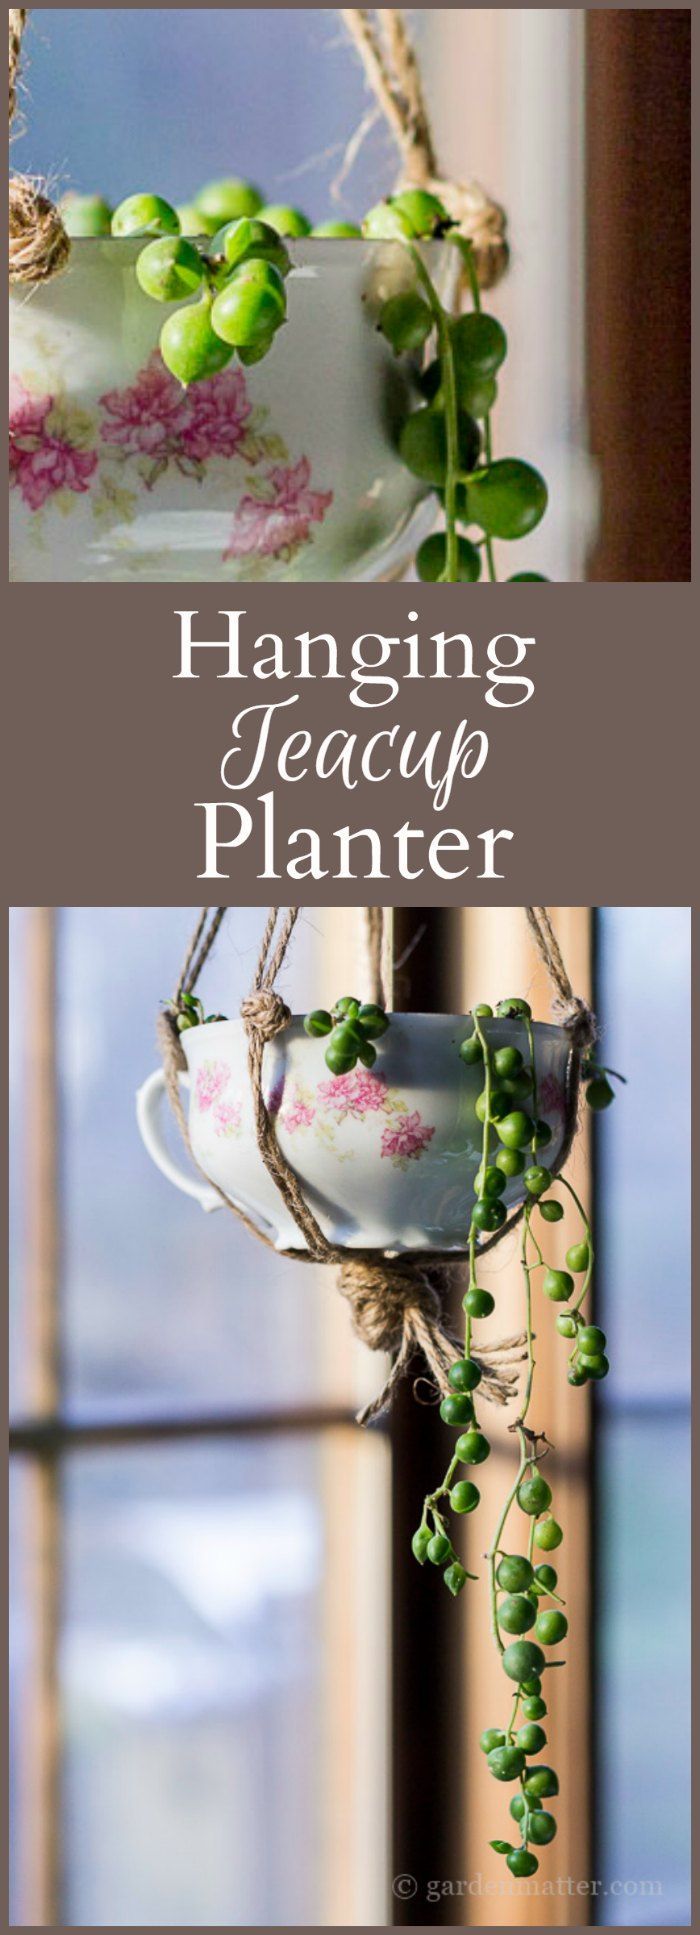 Learn how to create a hanging teacup planter by upcycling a china cup and planti...